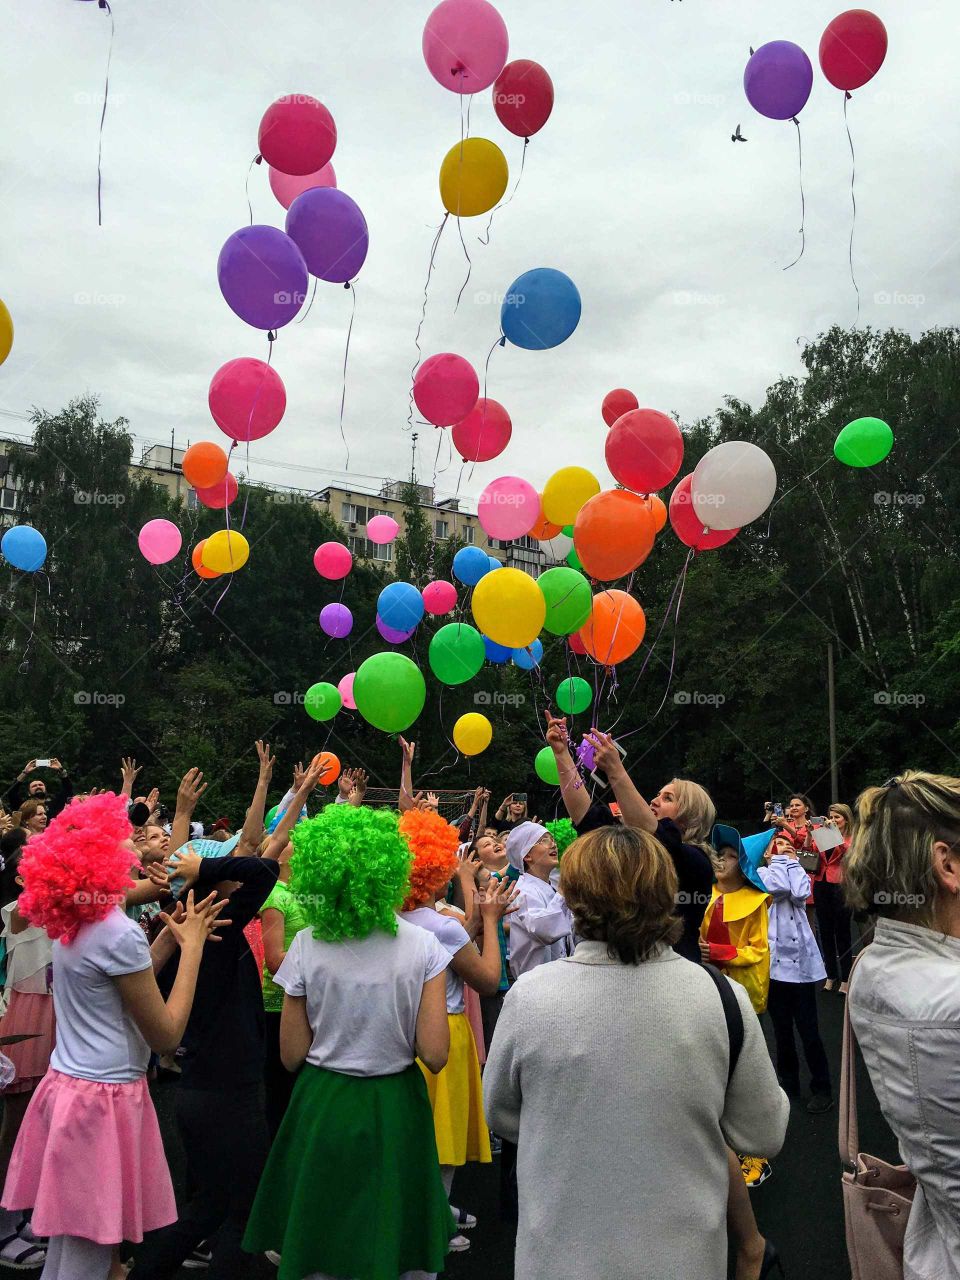 Children with the colourful balloons; celebration.